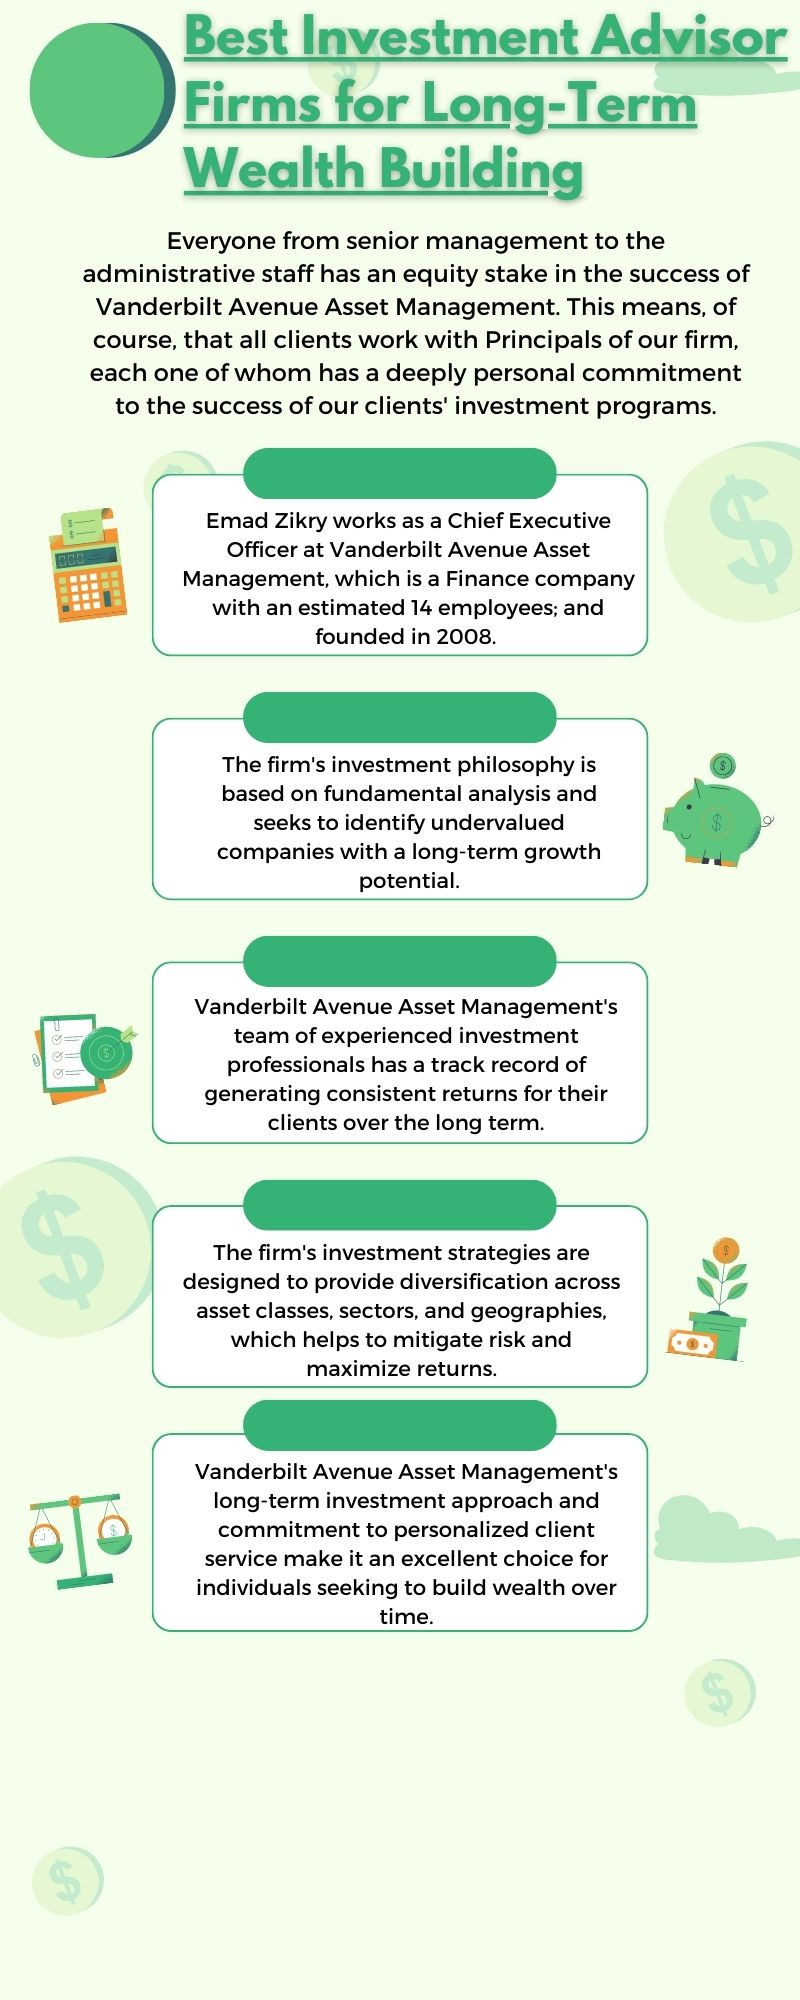 Best Investment Advisor Firms for Long-Term Wealth Building - Gifyu